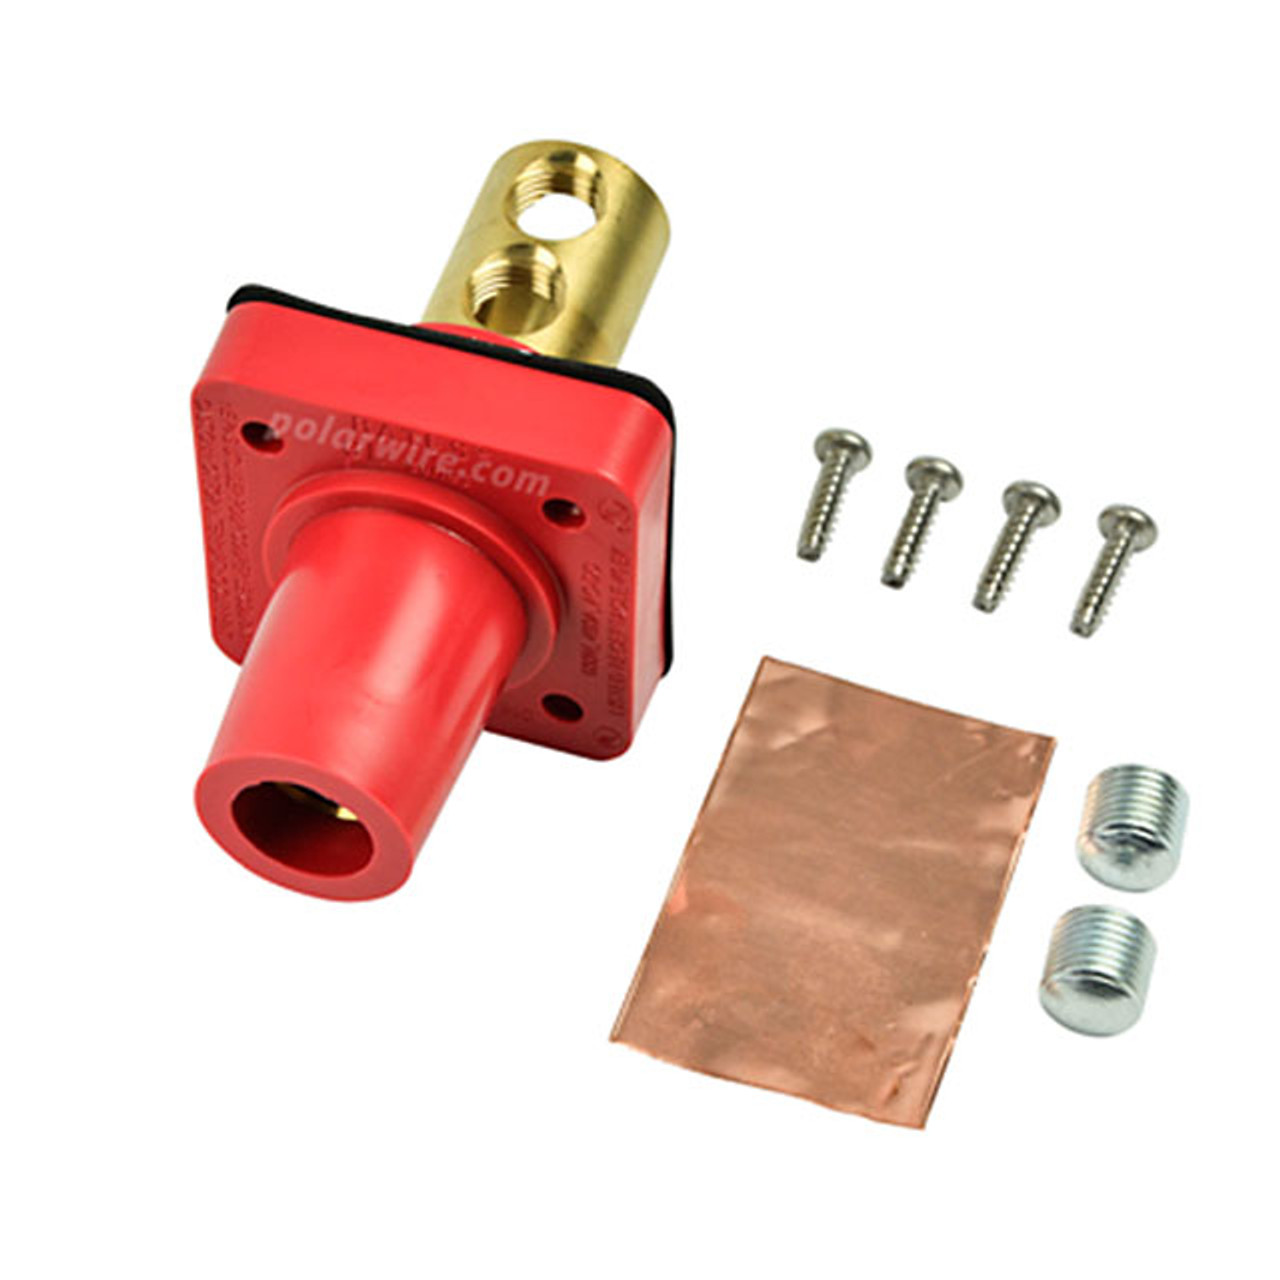 Marinco red 400A CL 16 Series female single pin panel mount cam lock connector with set screw for 2/0-4/0 AWG cable